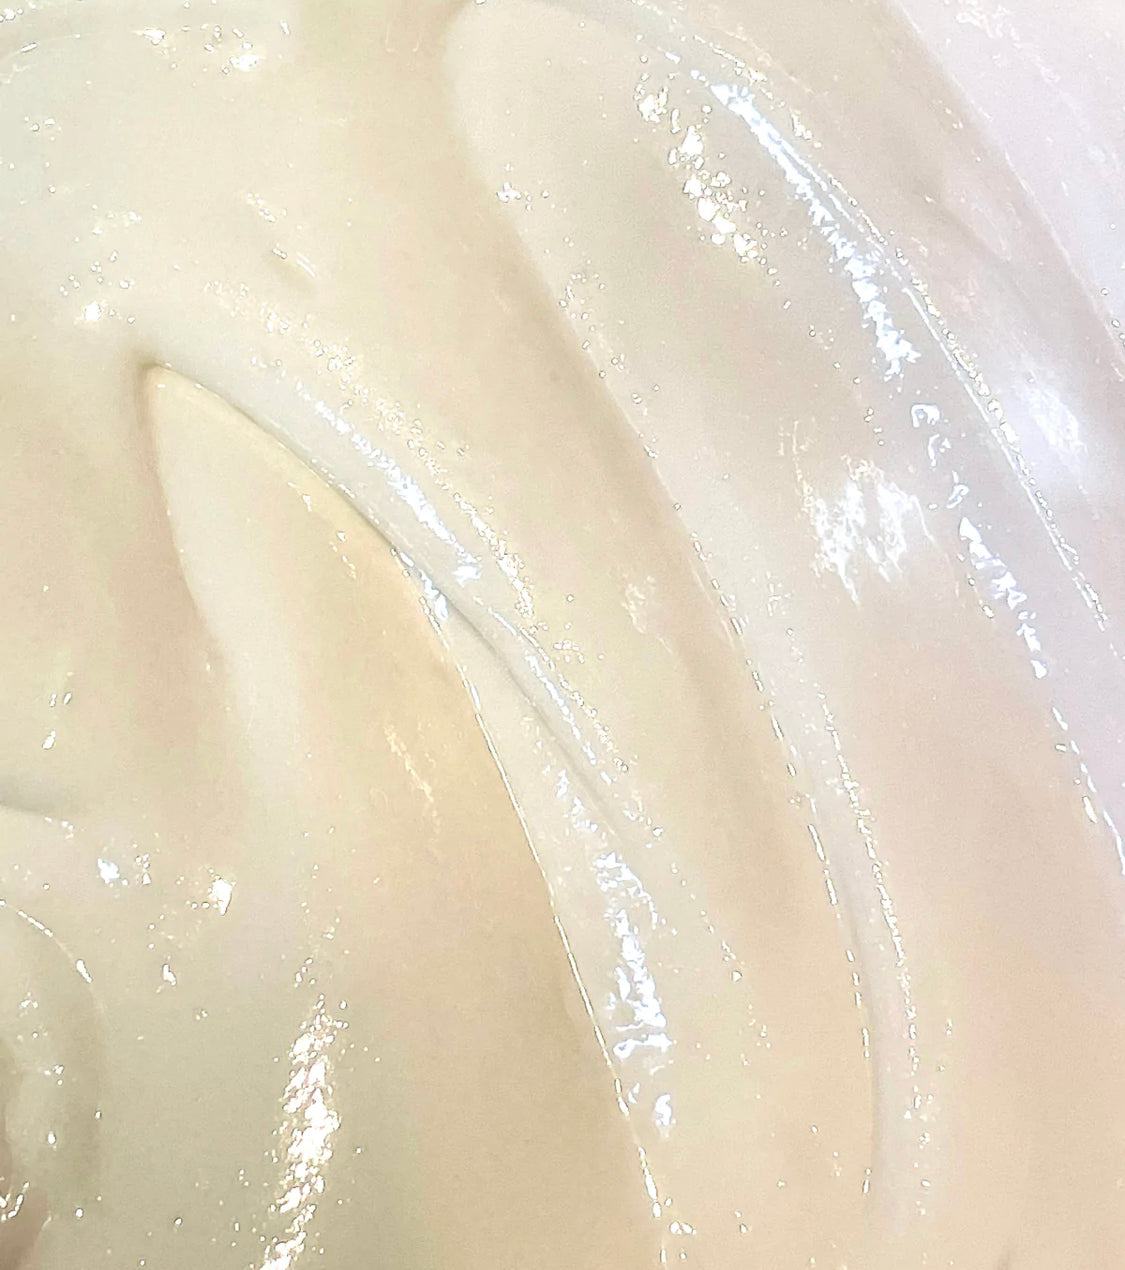 Skin Food Whipped Body Butter